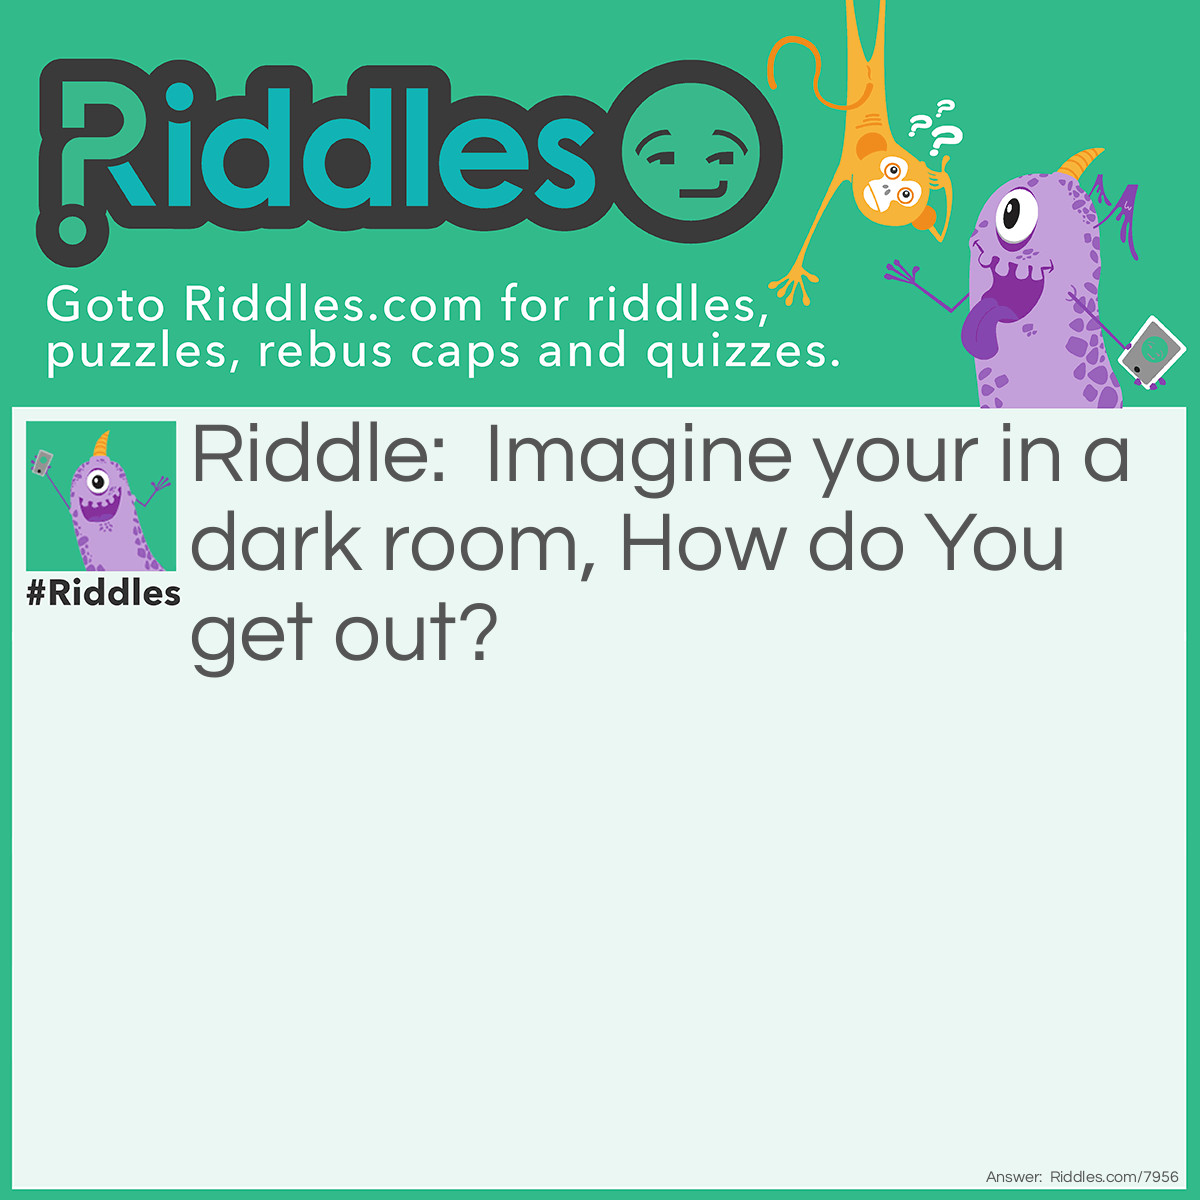 Riddle: Imagine your in a dark room, How do You get out? Answer: Stop imagining it!